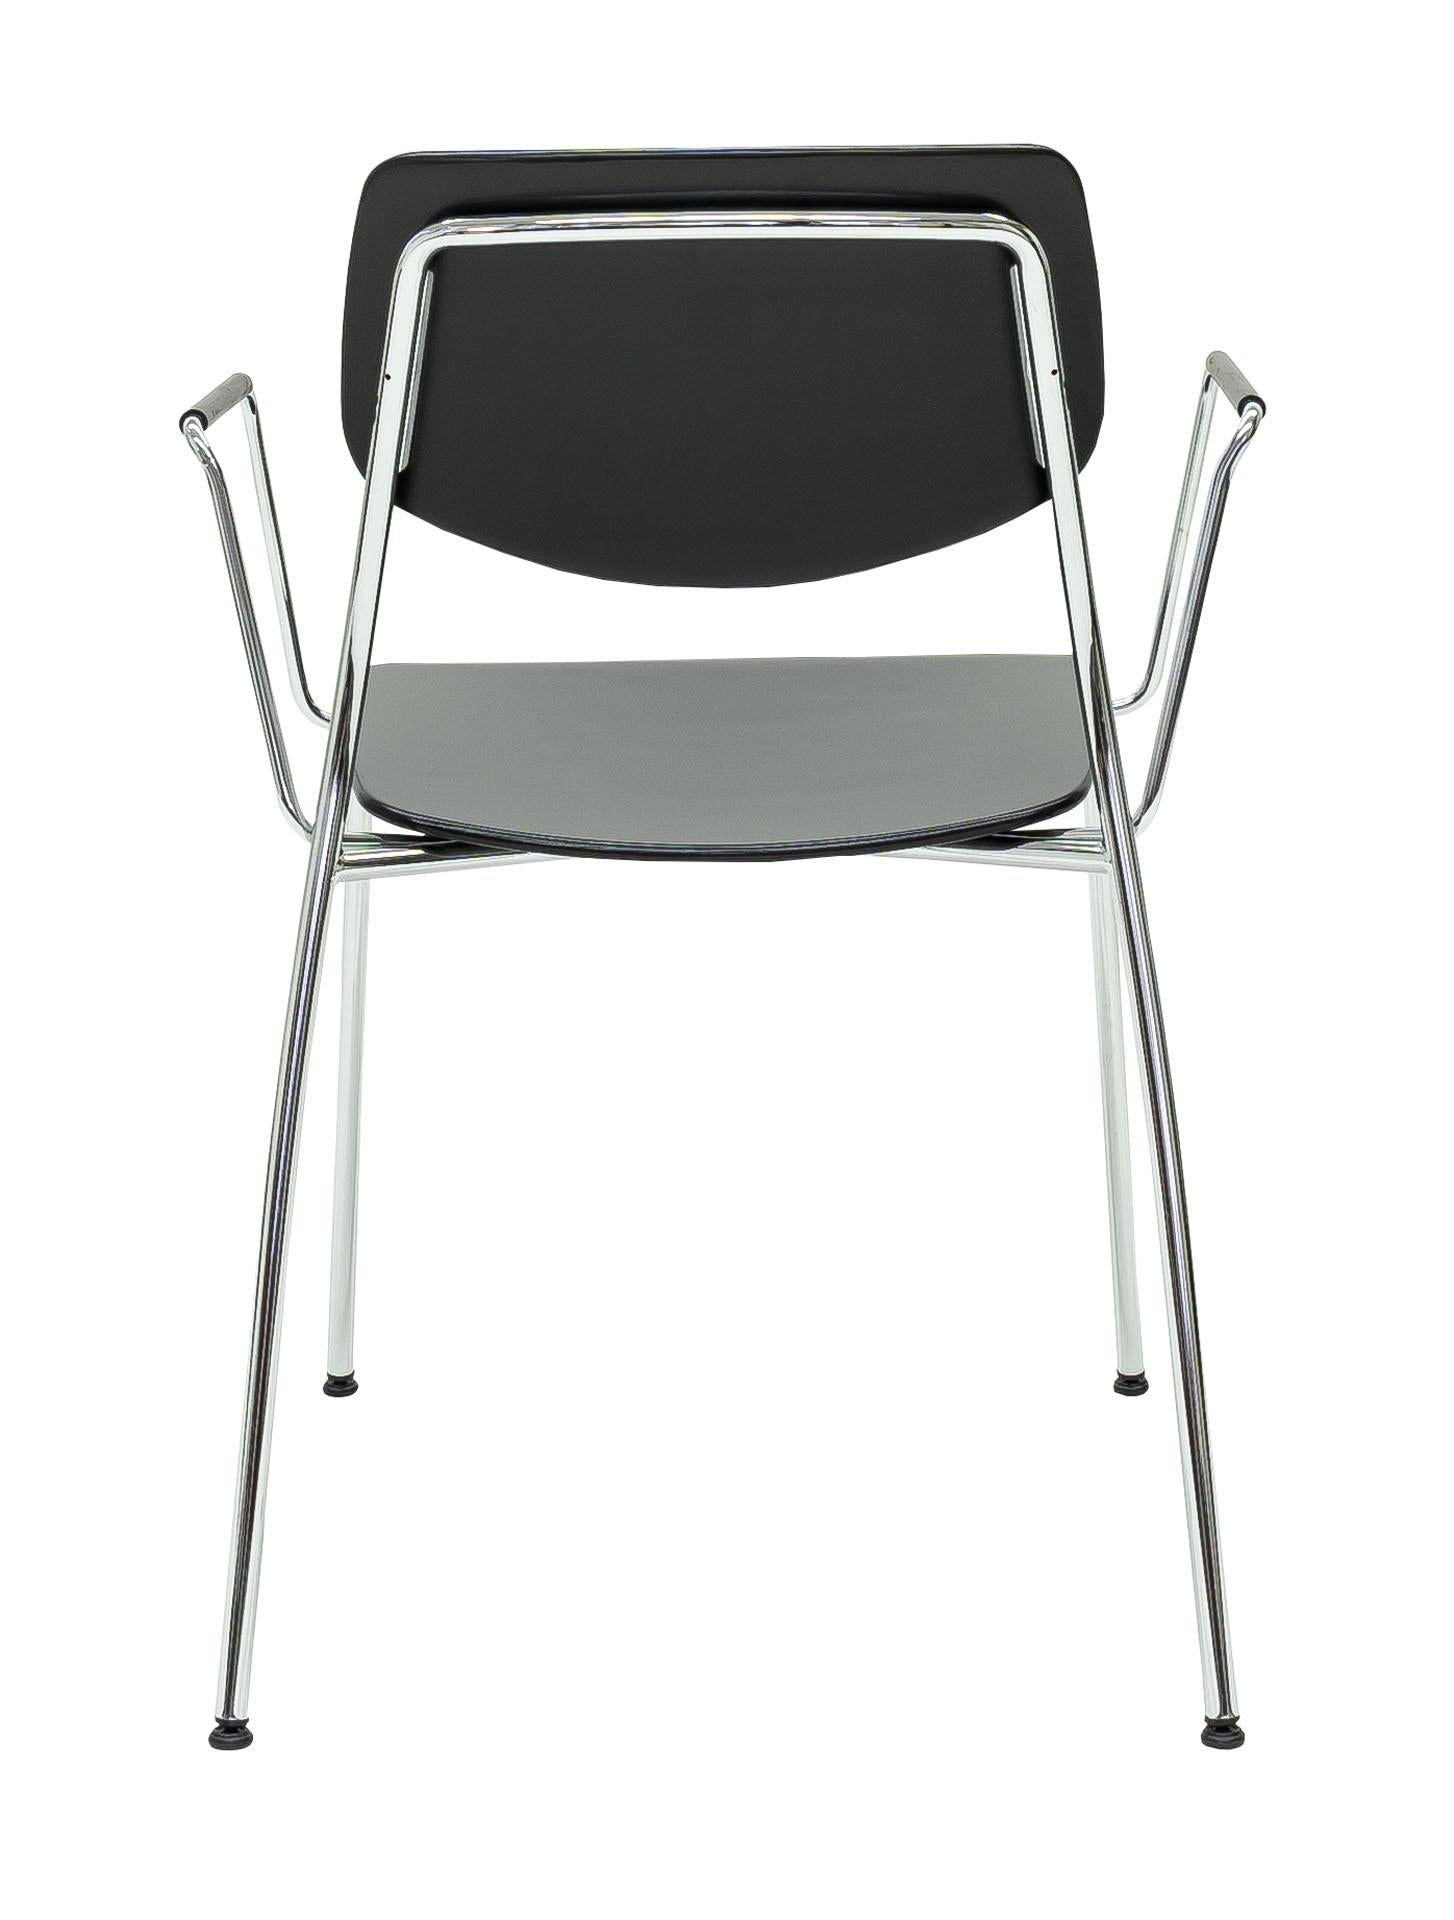 Modern Dietiker Felber C14 Metal Dining Chair with Arms, Modular Design, Set of 2 For Sale